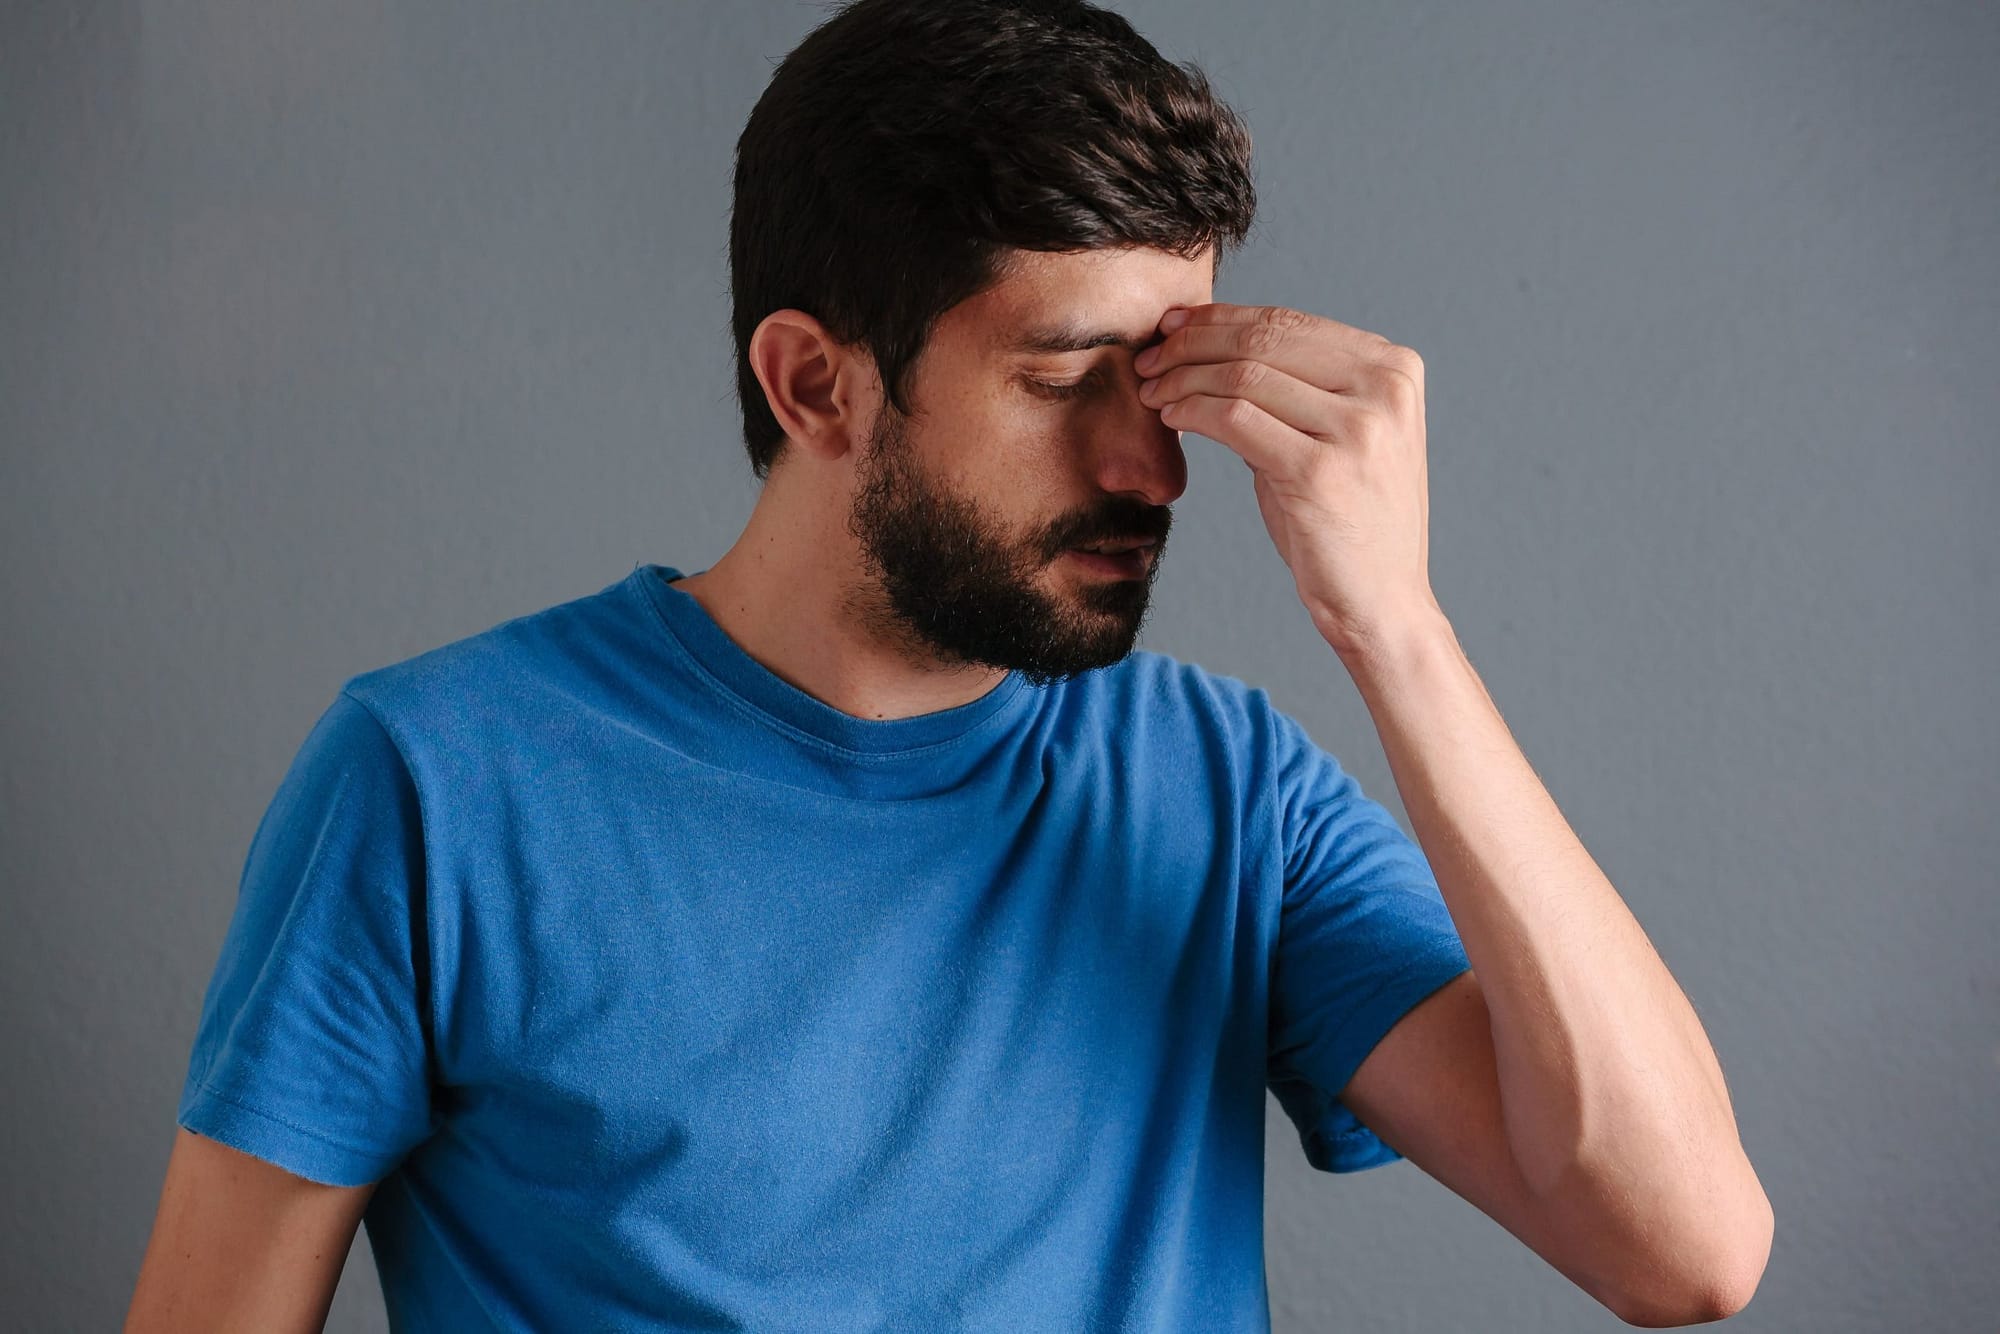 Symptoms of Sinus Infection and How to treat them